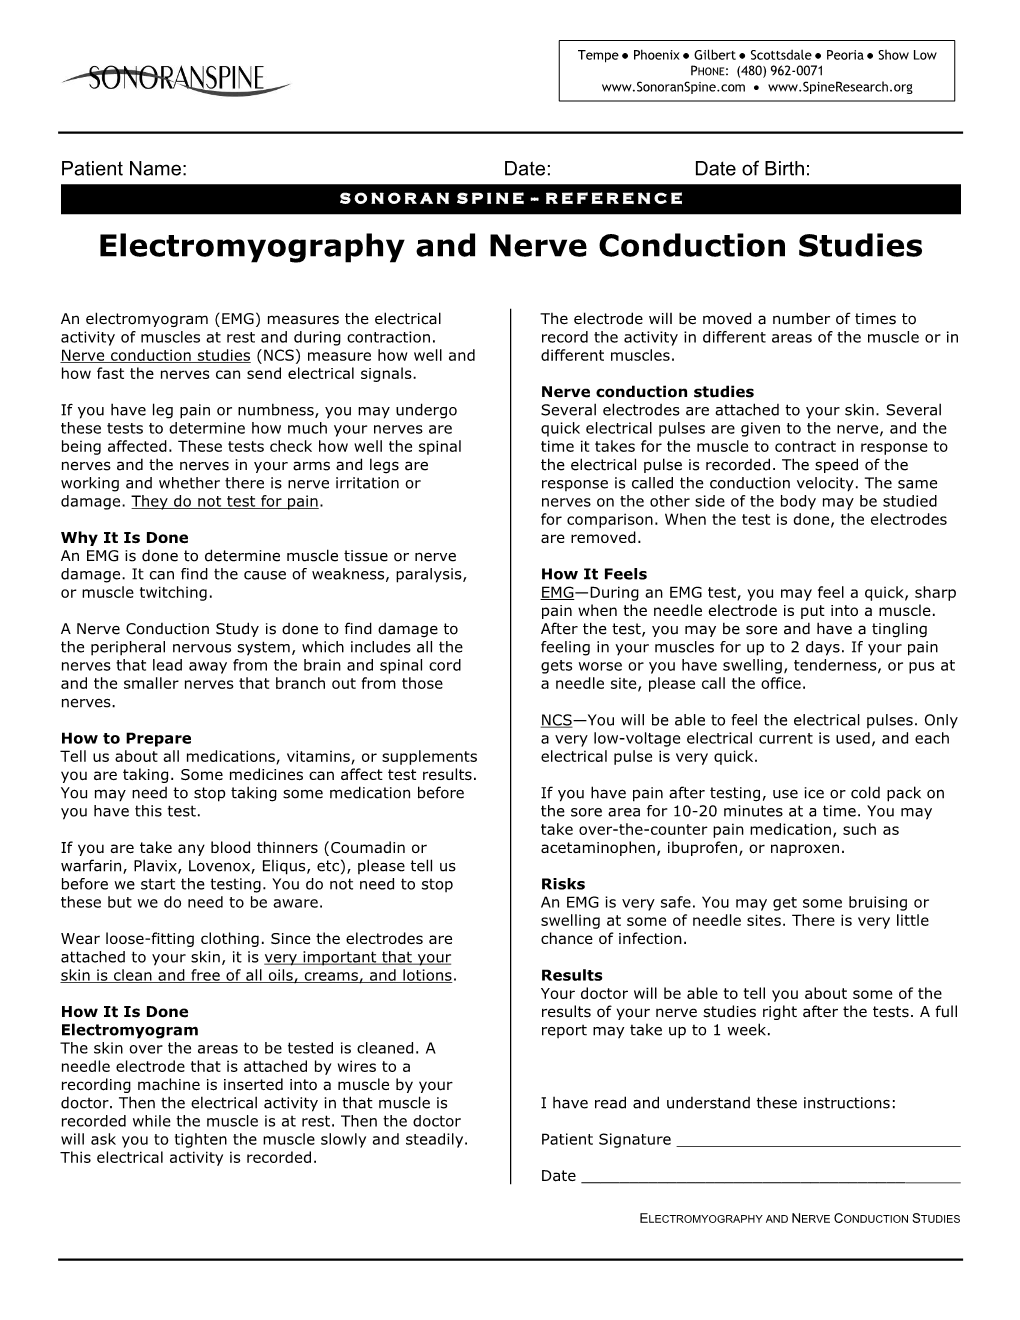 EMG (Electromyography) And/Or NCS (Nerve Conduction Studies)